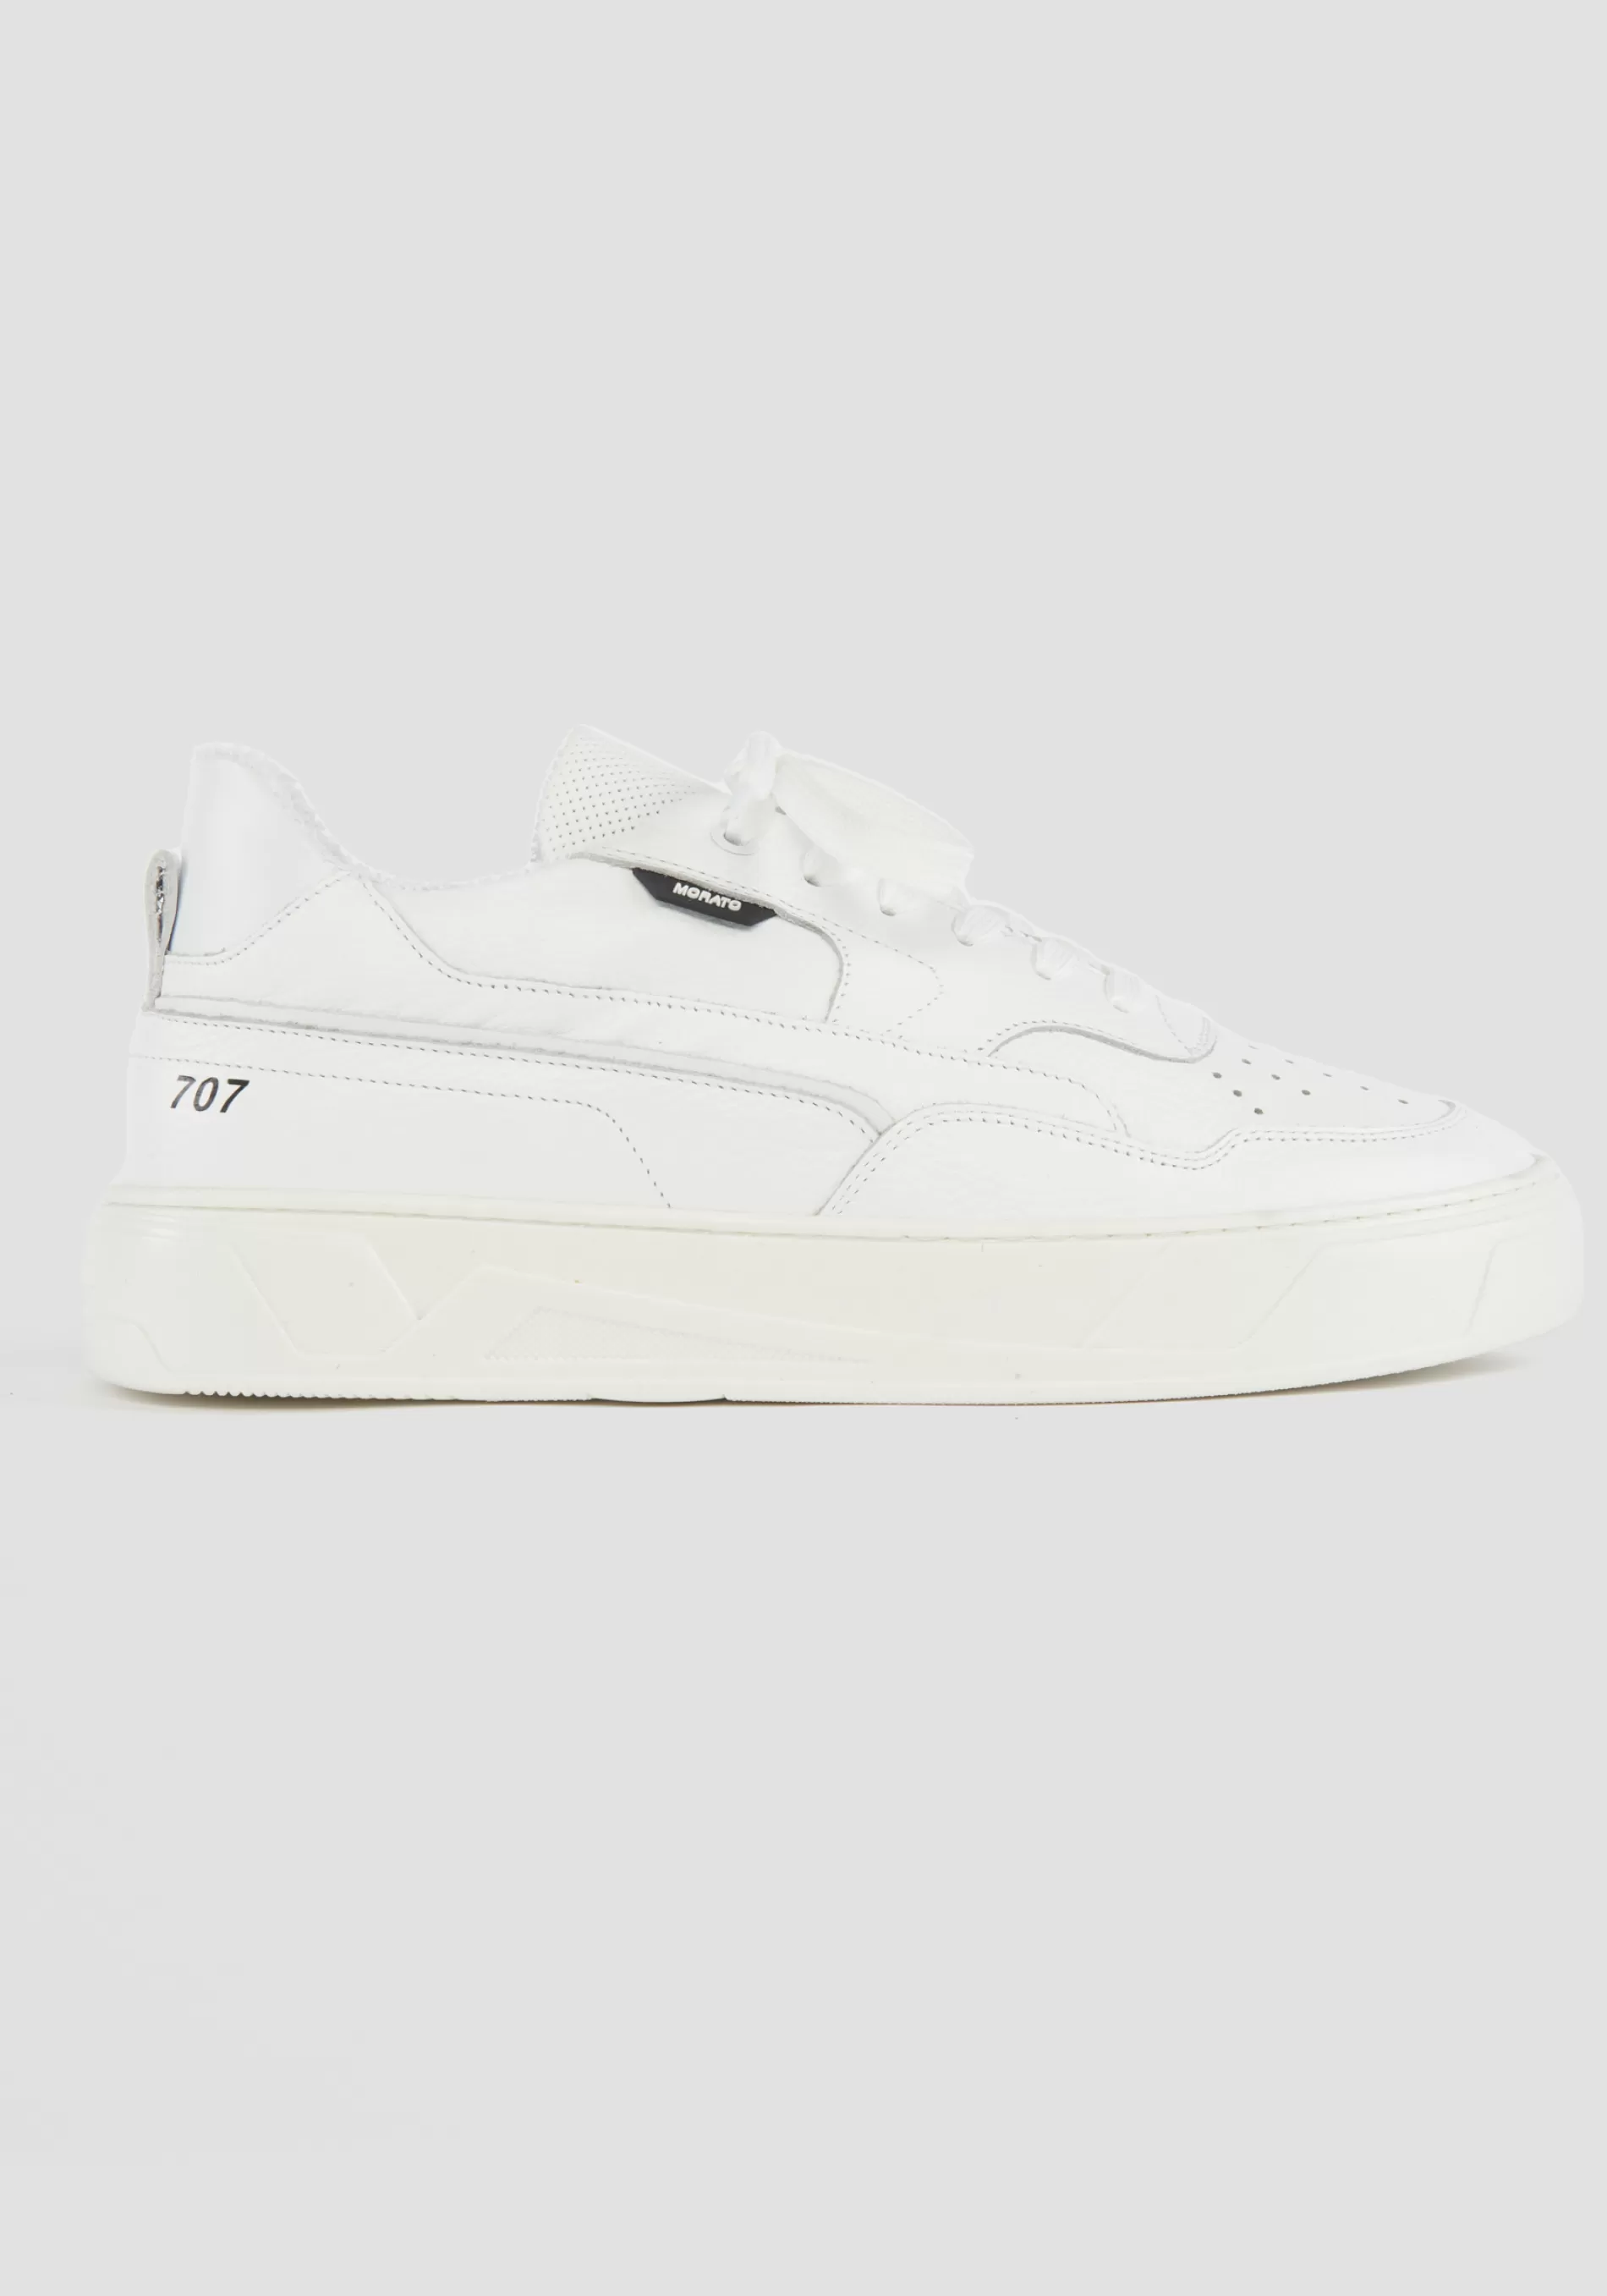 Clearance "707" LOW-TOP LEATHER SNEAKERS Sneakers